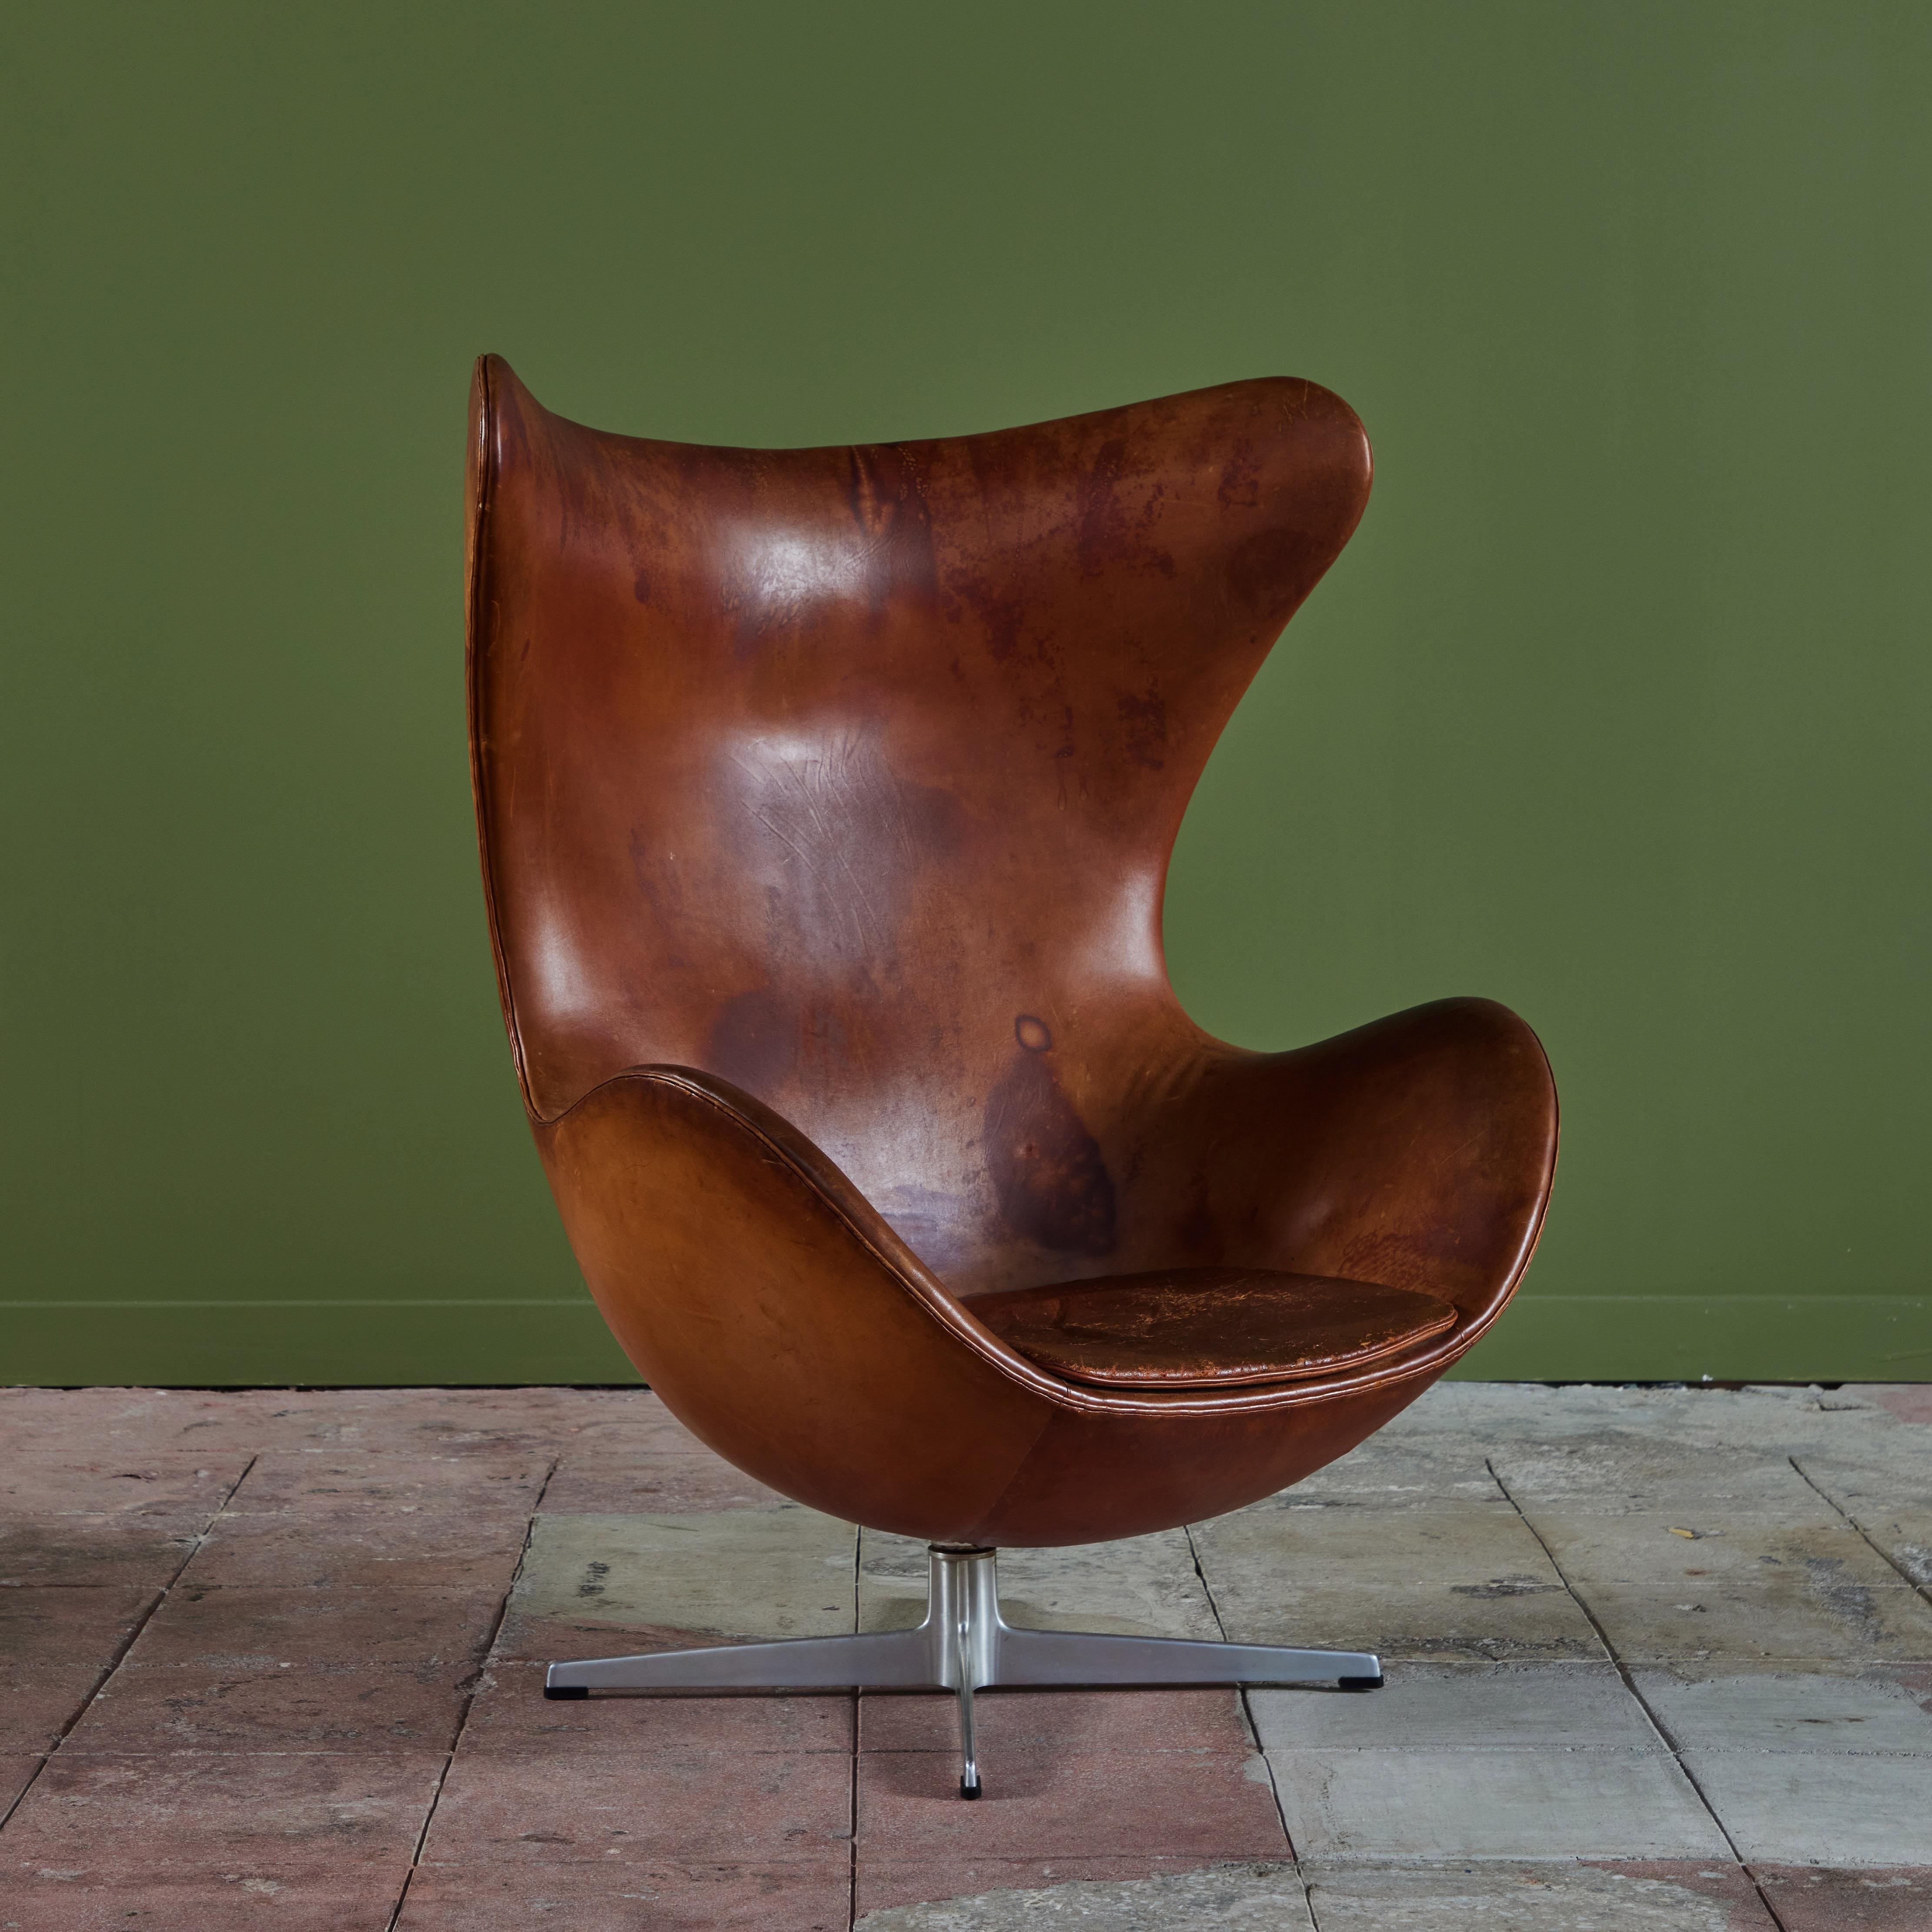 The iconic, Arne Jacobsen-designed egg chair, c.1960s, Denmark. The chair features its original rich saddle colored leather with its own distinctive patination. The high-backed chair has a seat cushion and swivels 360° on a four star aluminum base